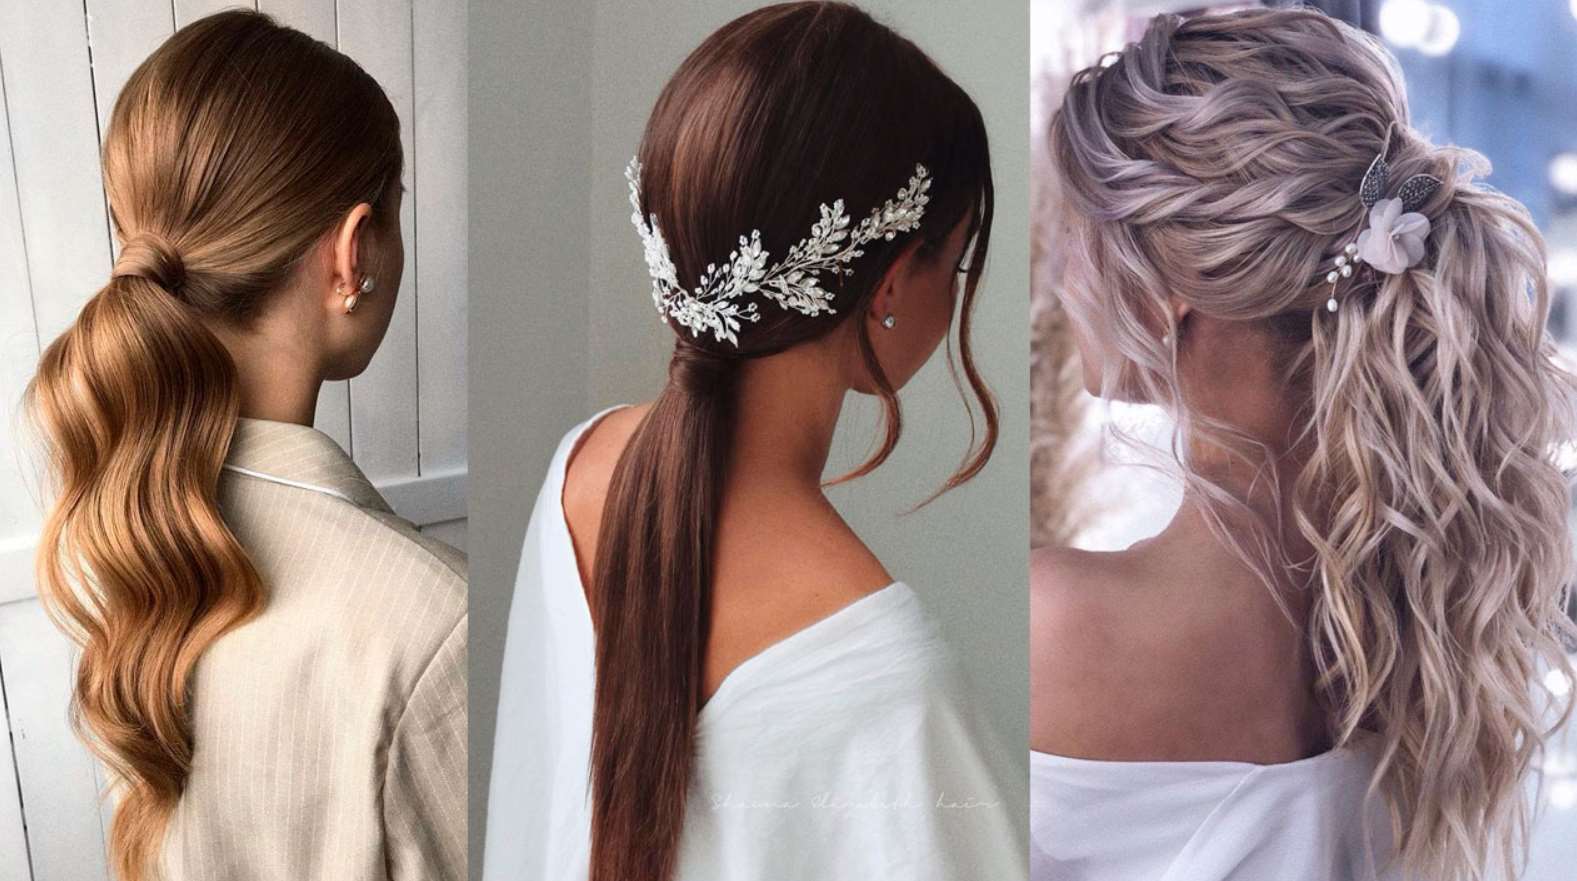 wedding hairstyles for natural hair